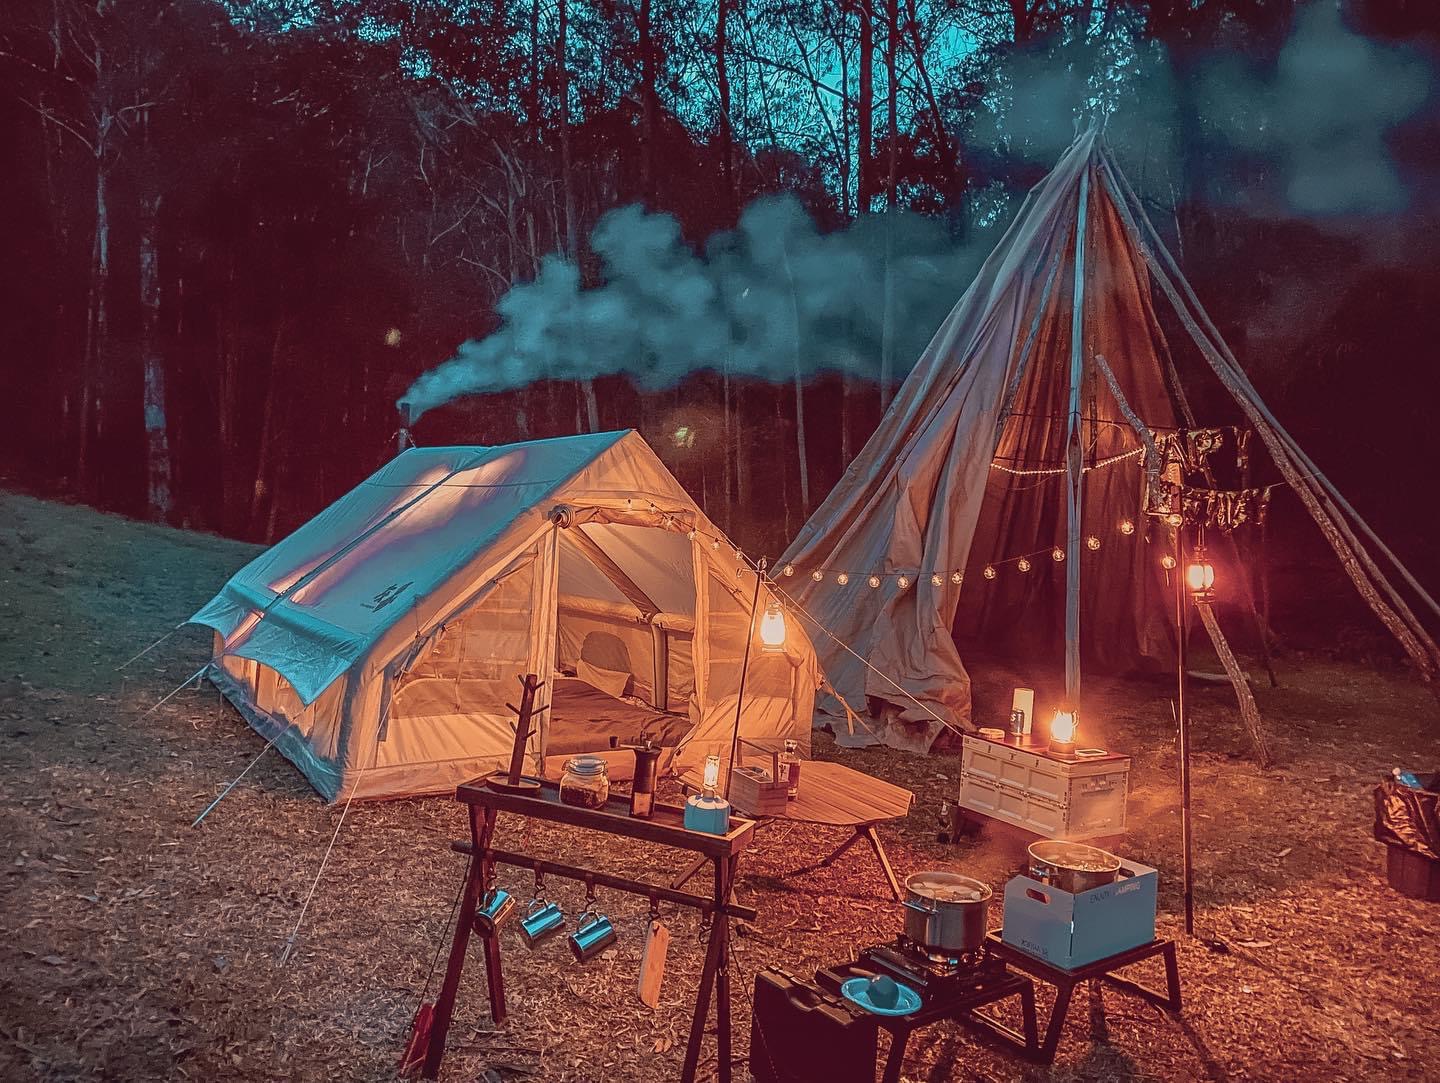 the tent on the left isn't included in the booking.